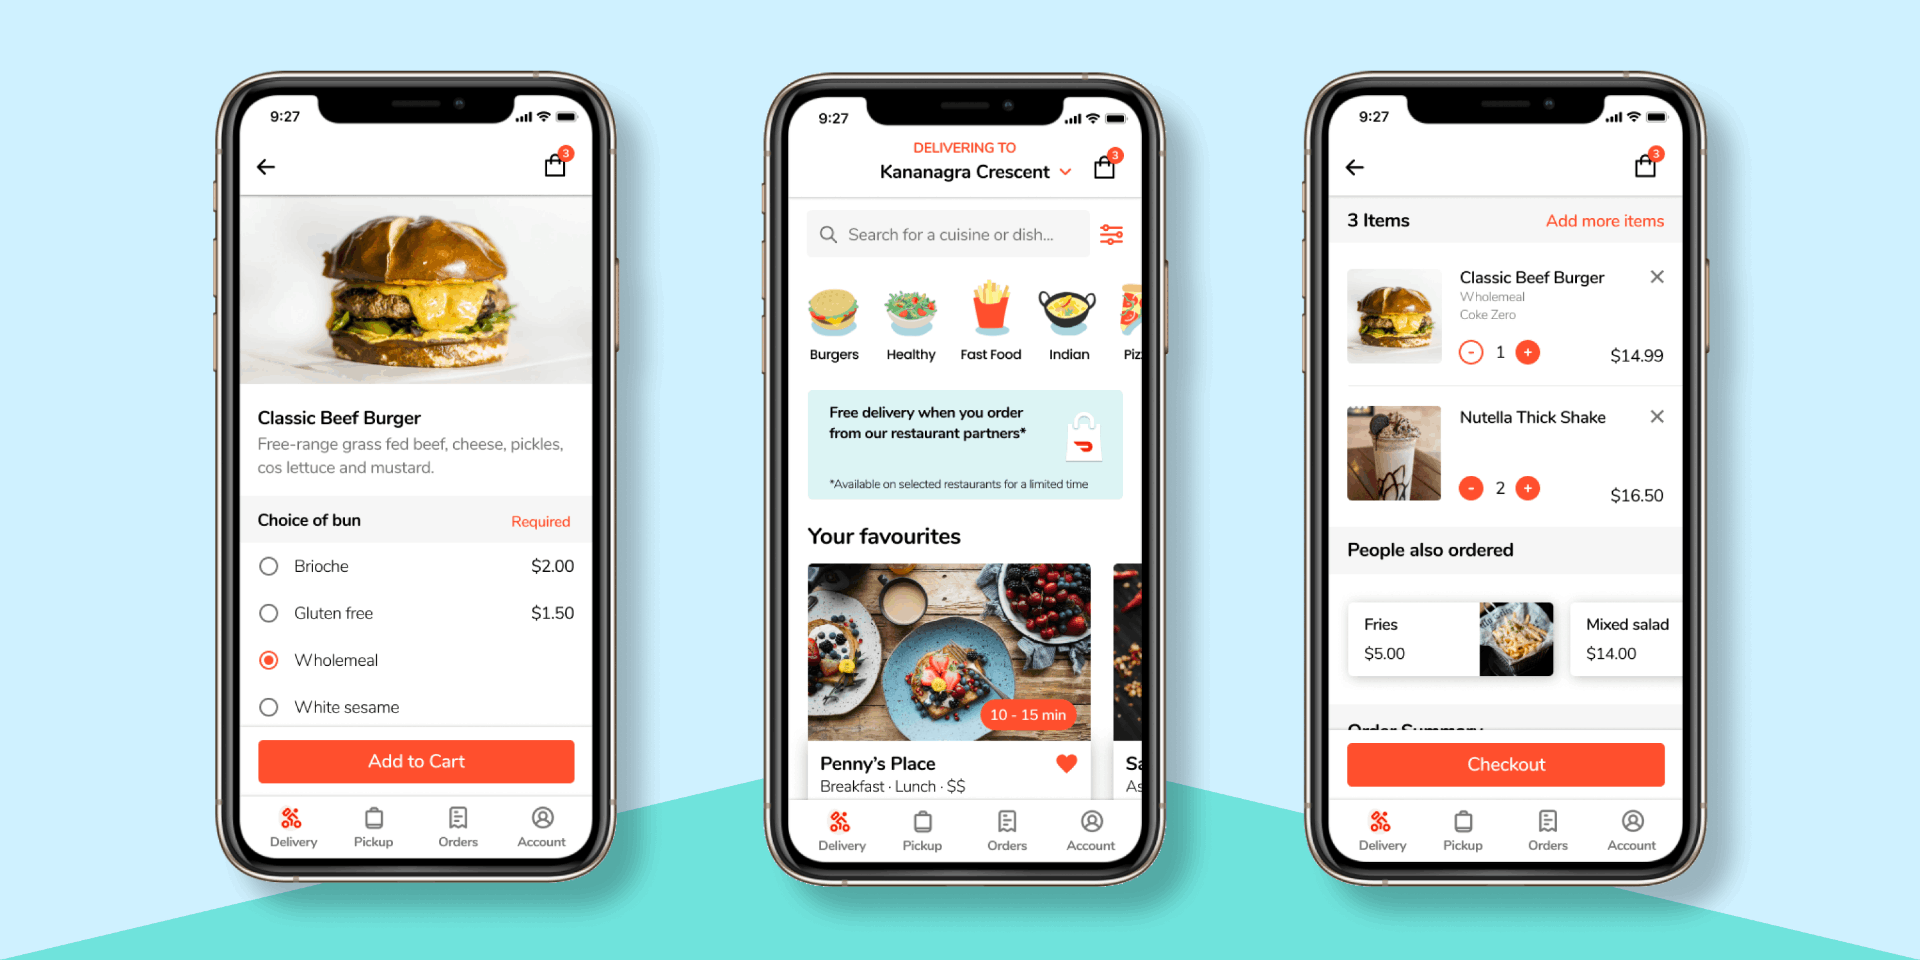 DoorDash - Discover the Newest Food Delivery App